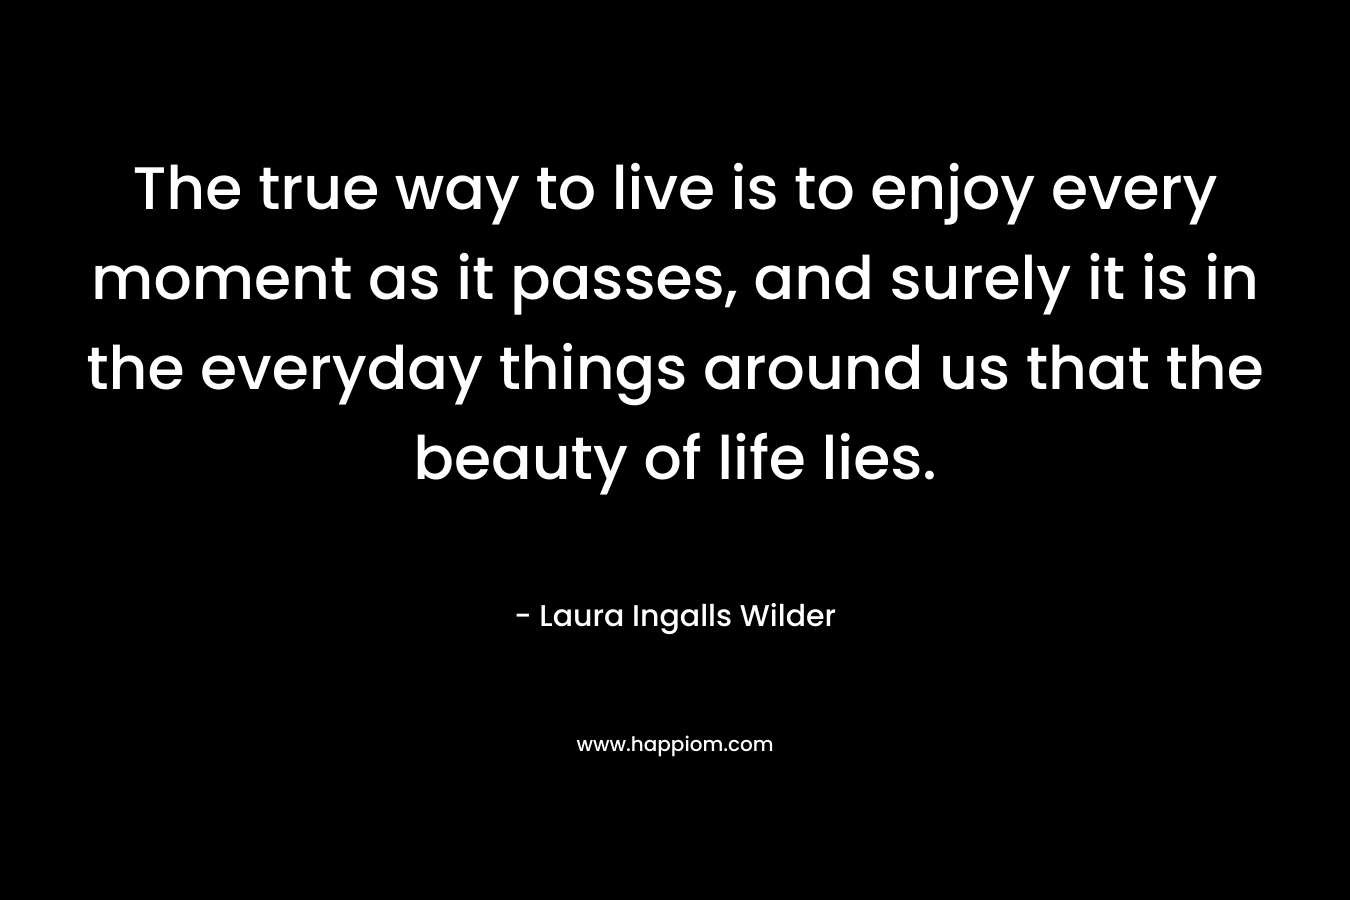 The true way to live is to enjoy every moment as it passes, and surely it is in the everyday things around us that the beauty of life lies. – Laura Ingalls Wilder